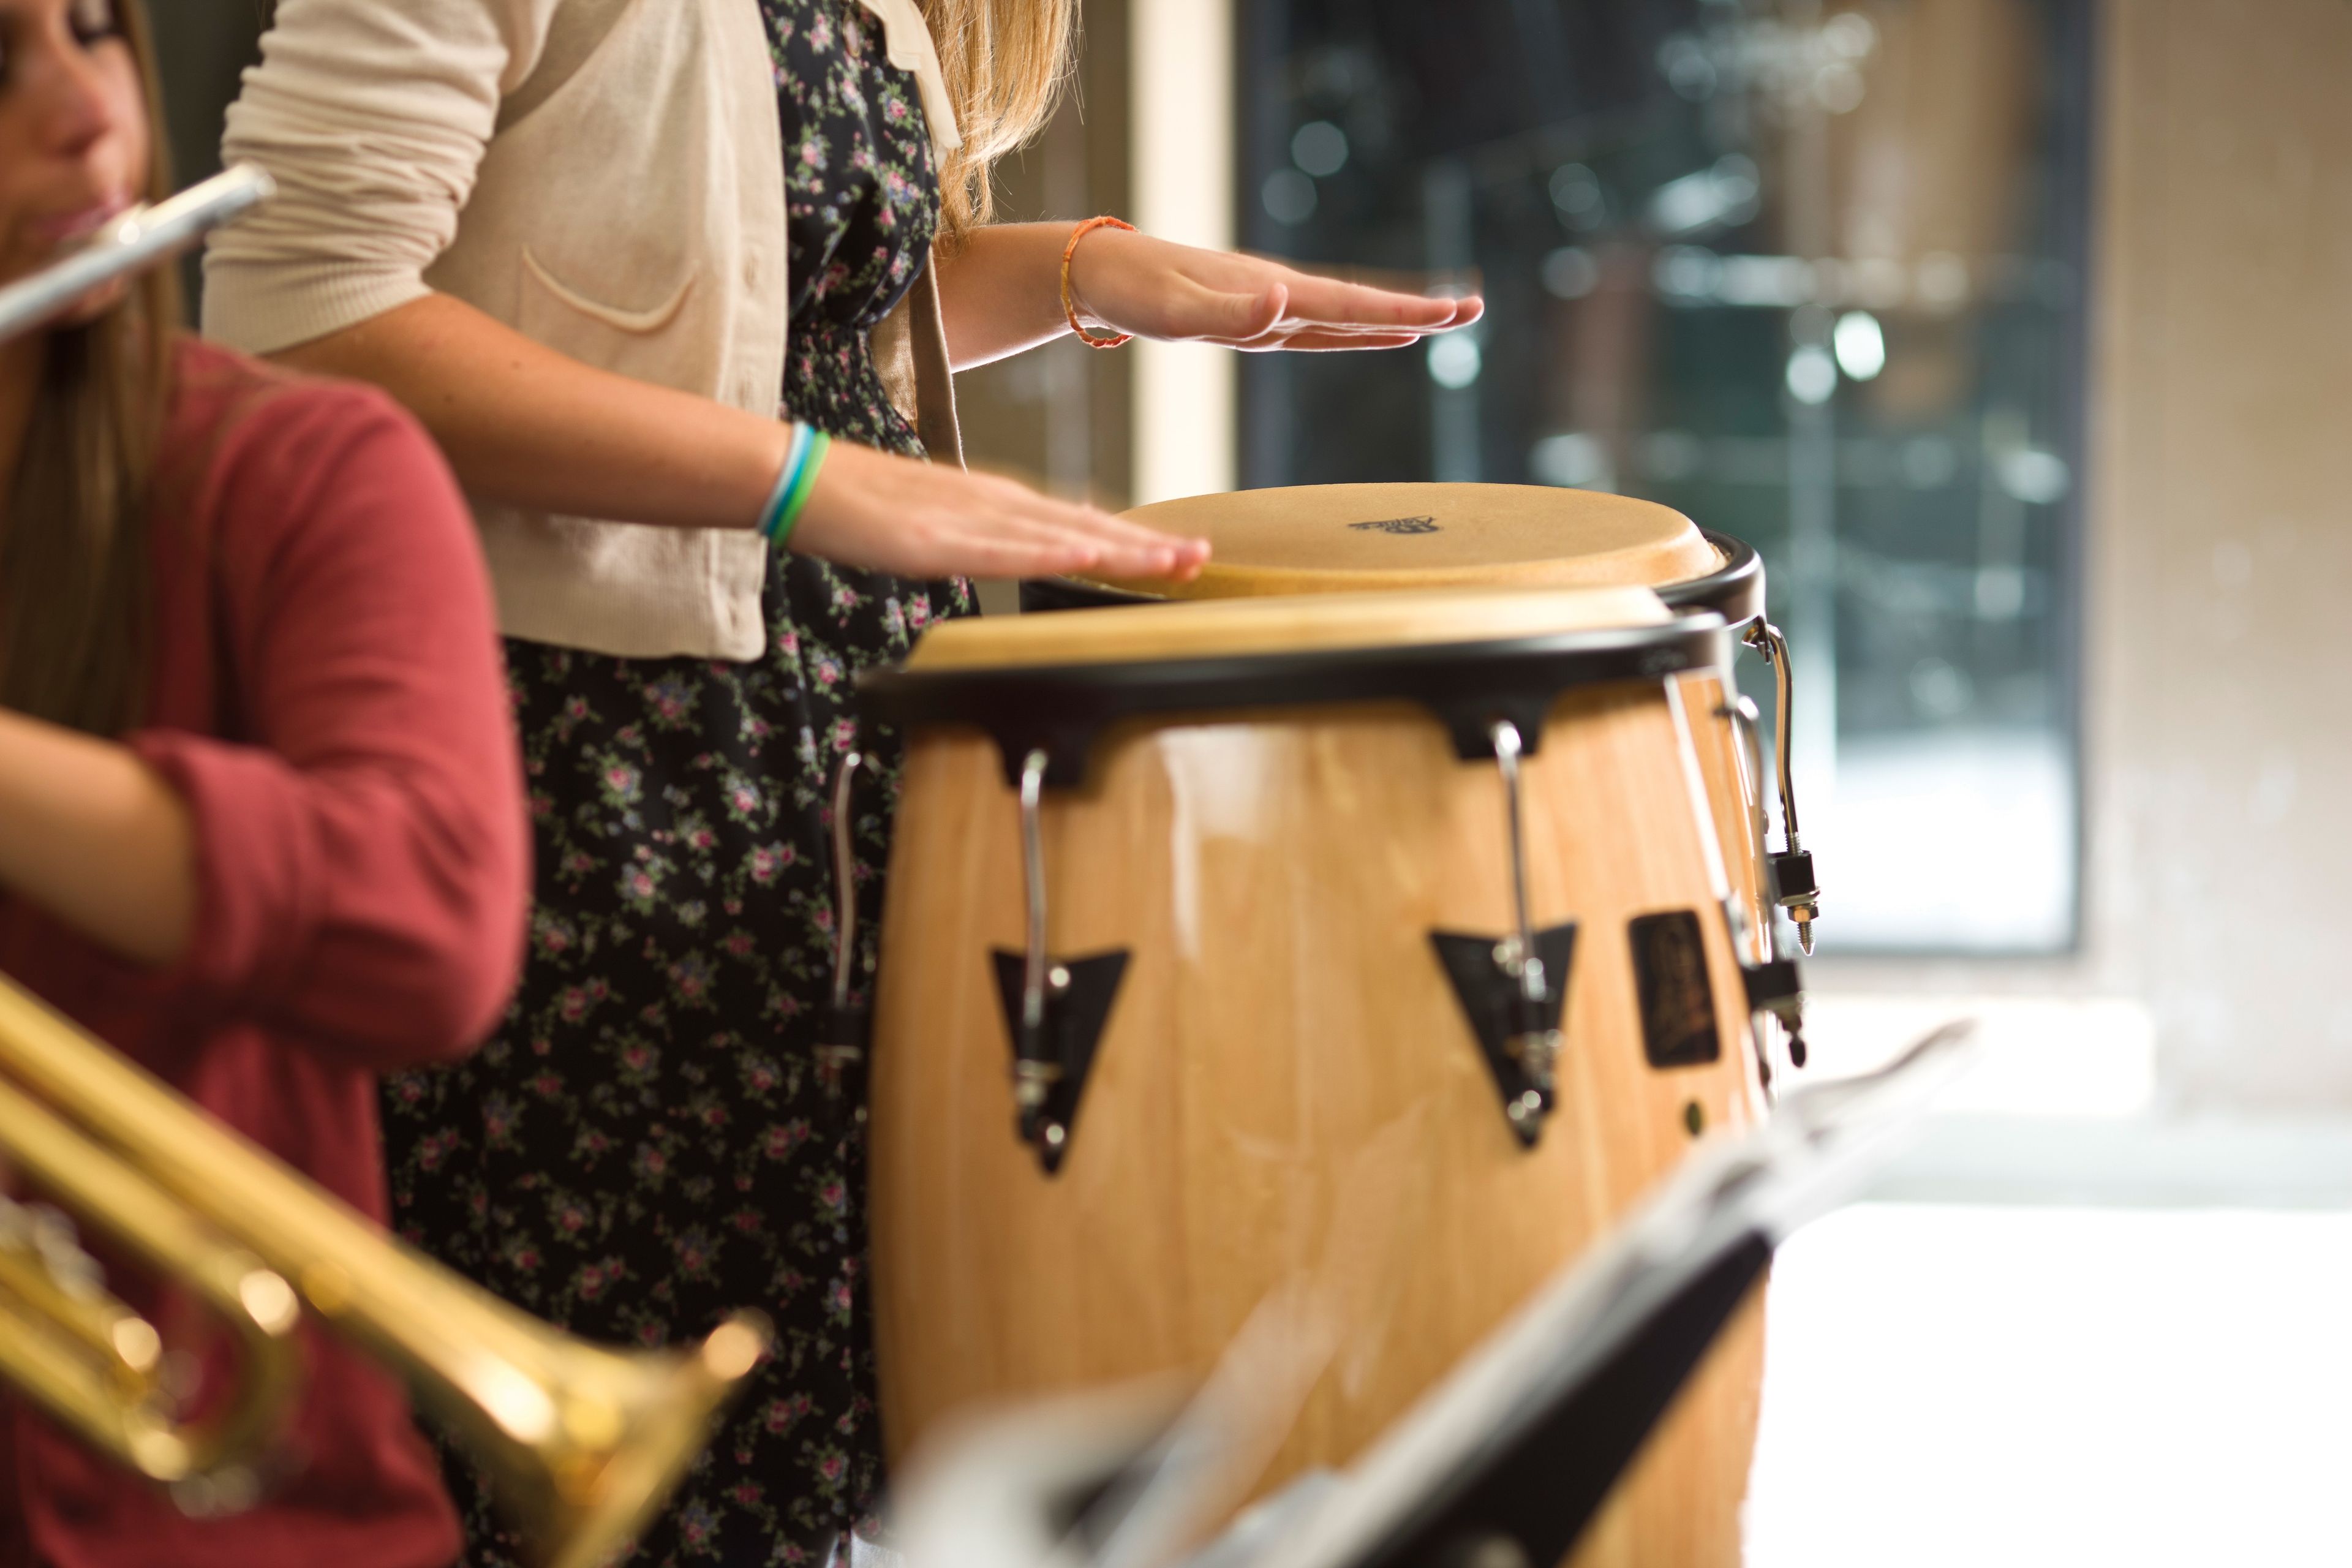 Hands are seen playing a drum.